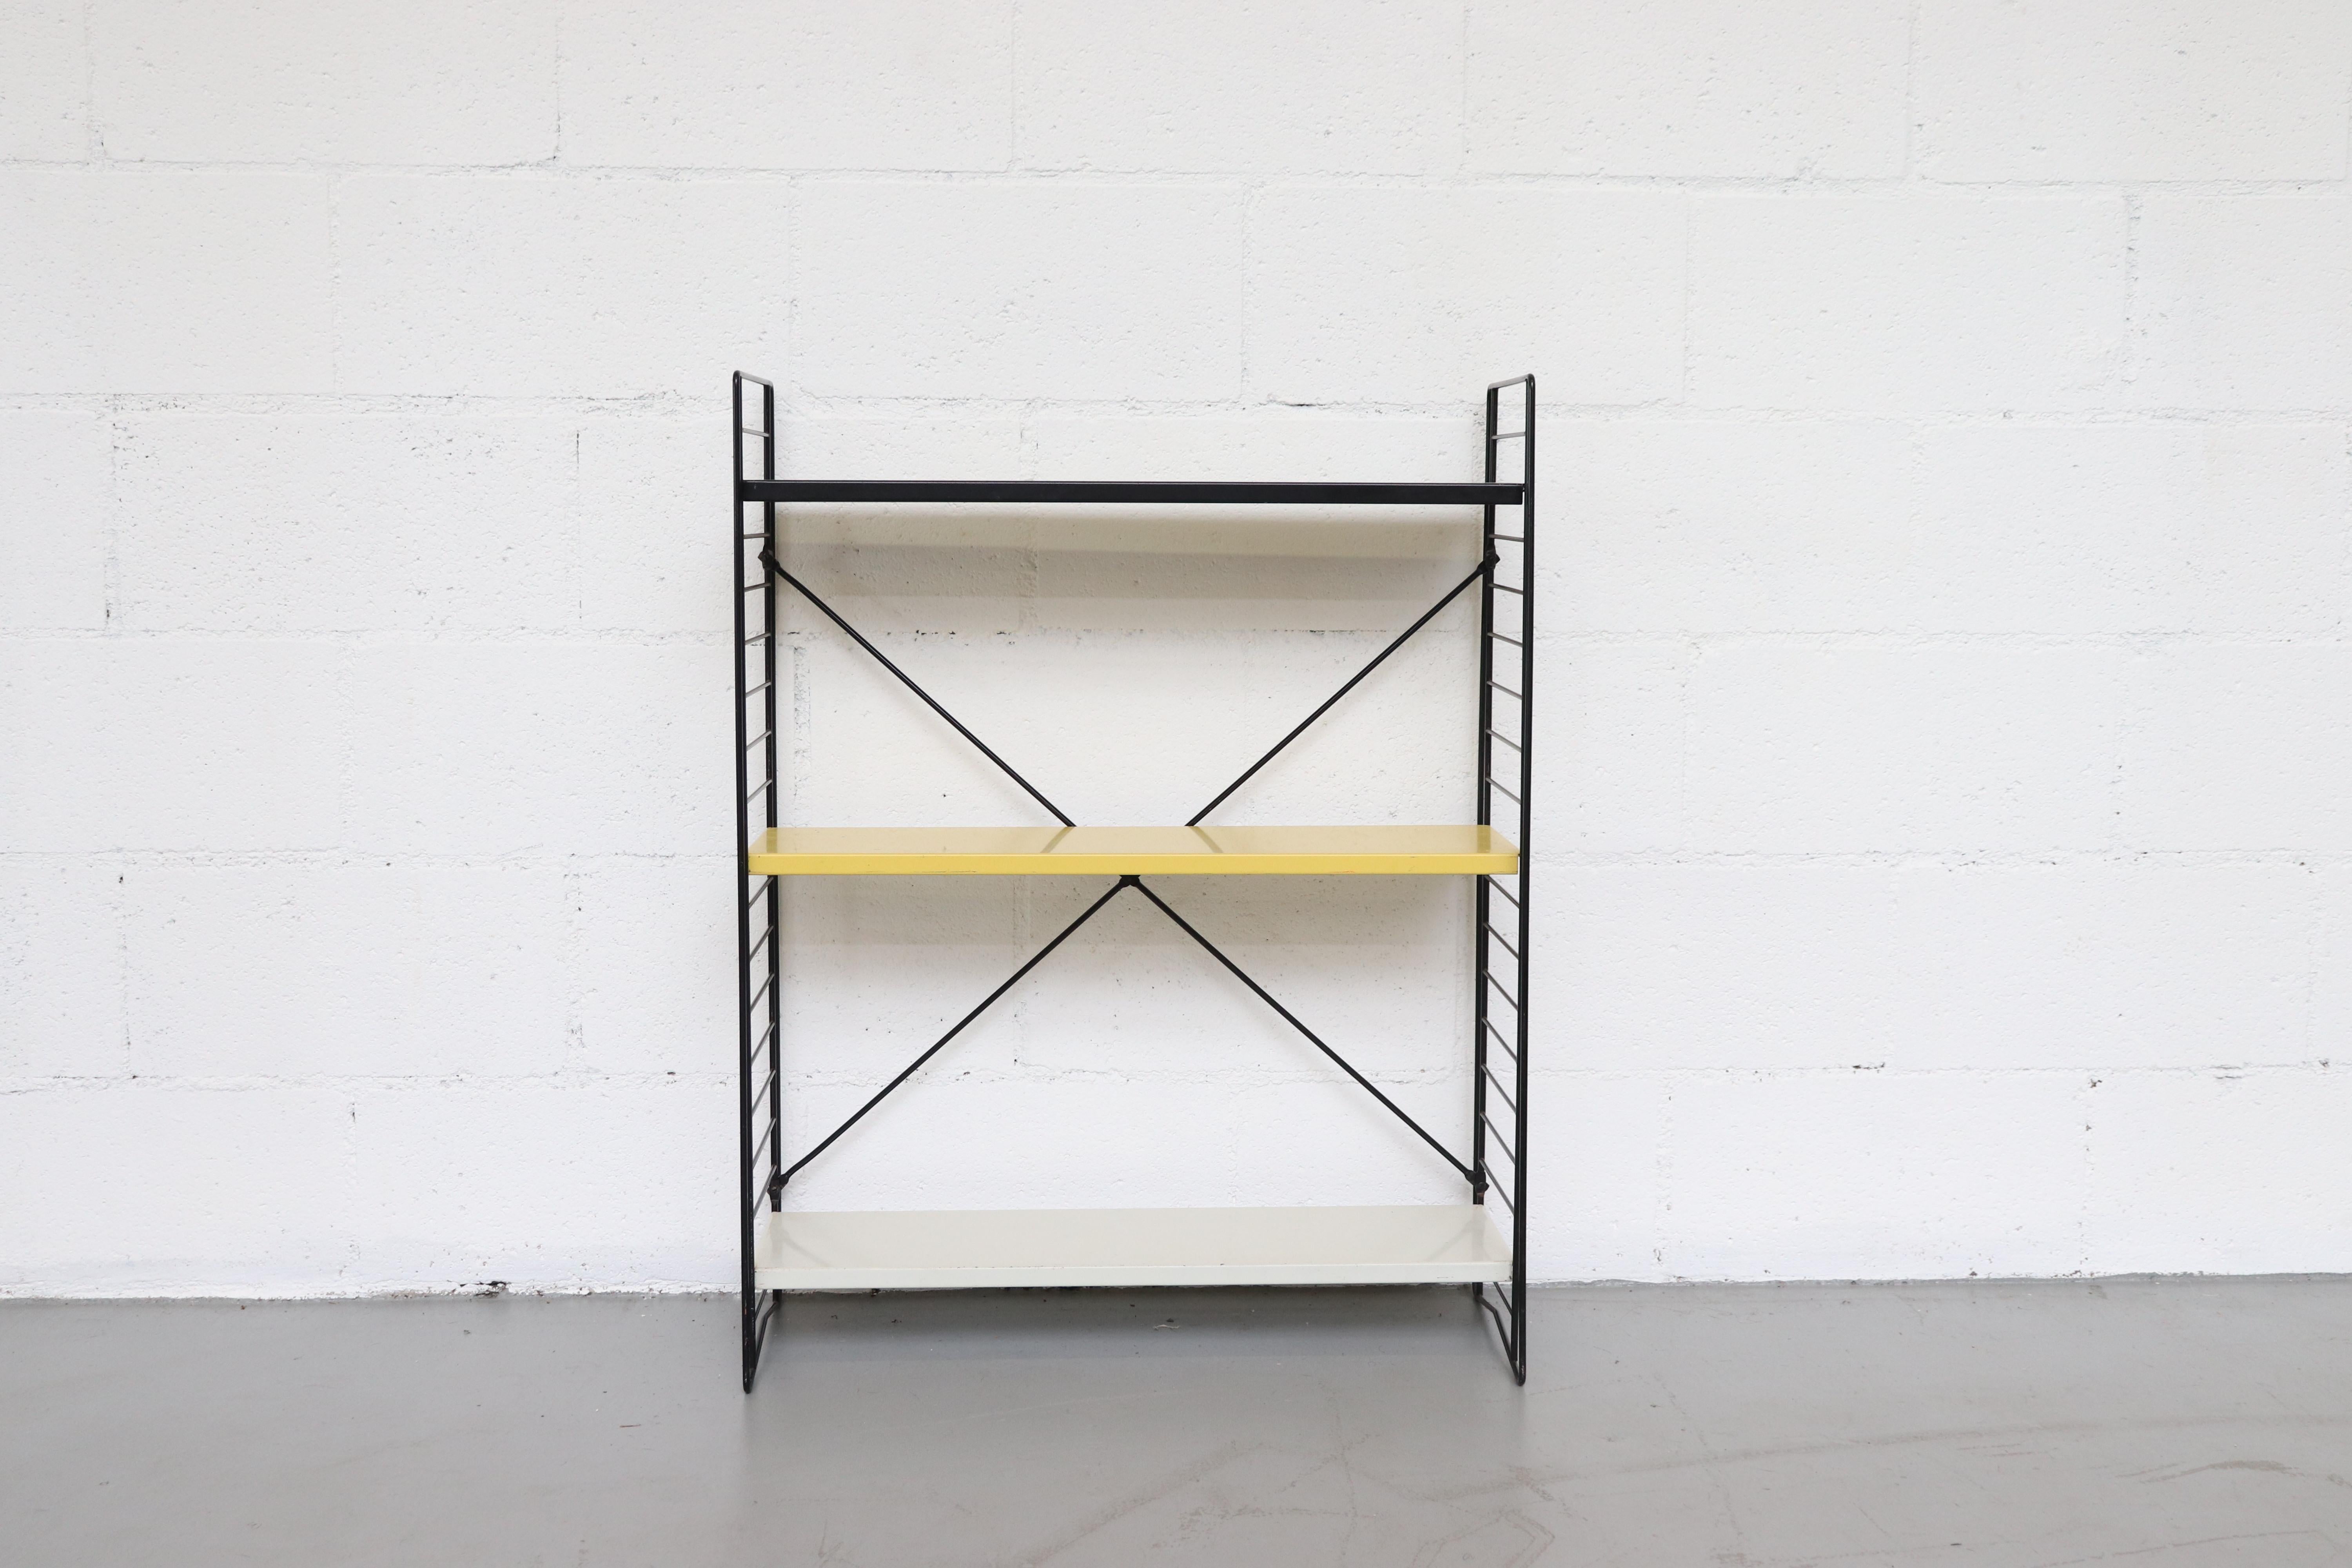 Multicolored black, yellow, white enameled metal shelves with black wire stands. Shelves are moveable.